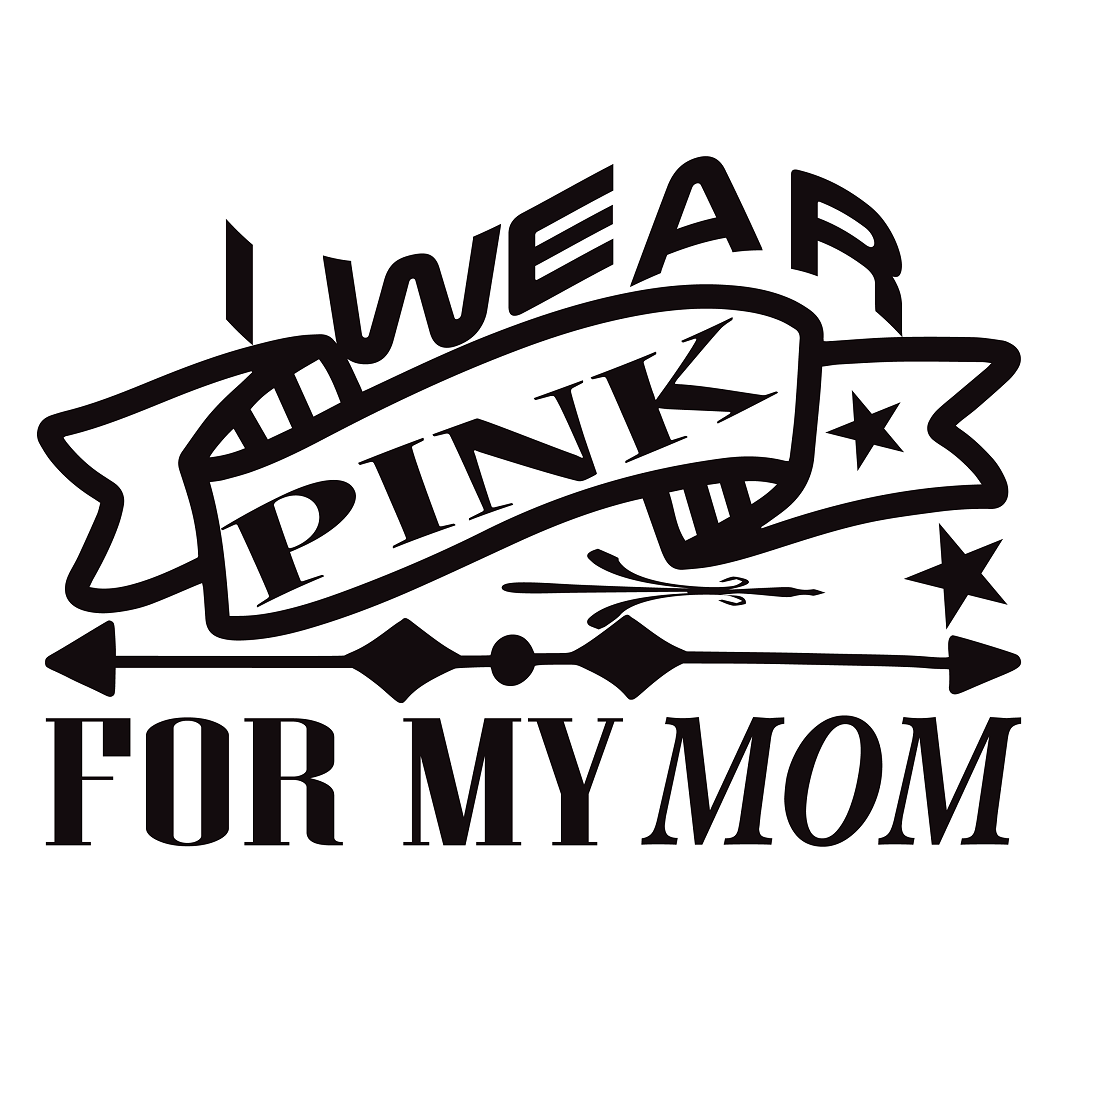 I Wear Pink For My Mom preview image.